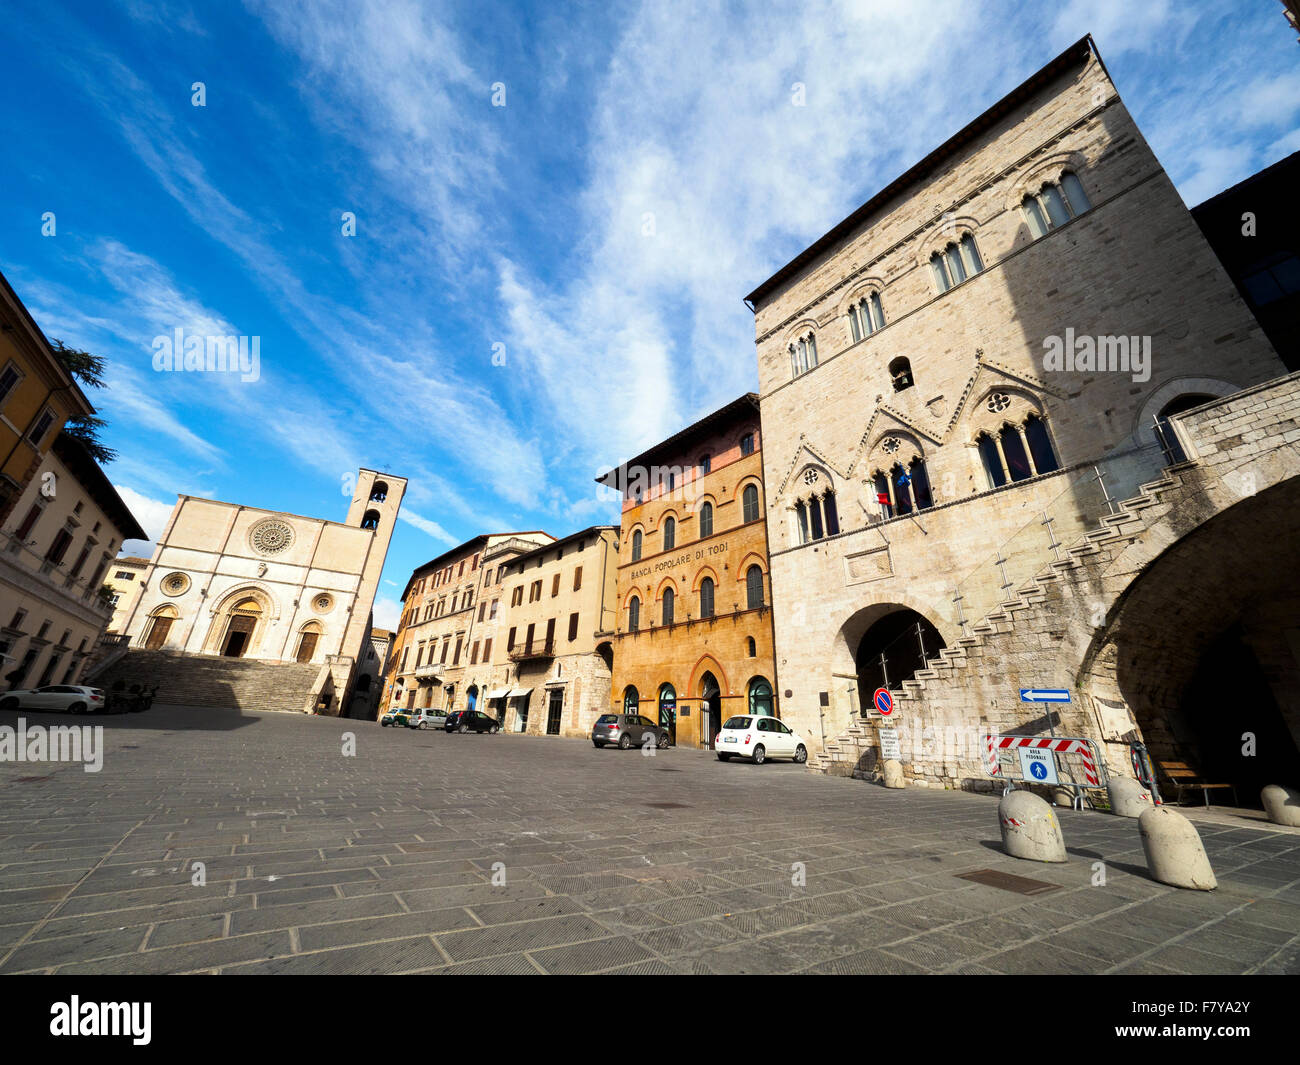 Piazza del popolo (people square) with the cathedral in the small town of Todi - Perugia, Italy Stock Photo